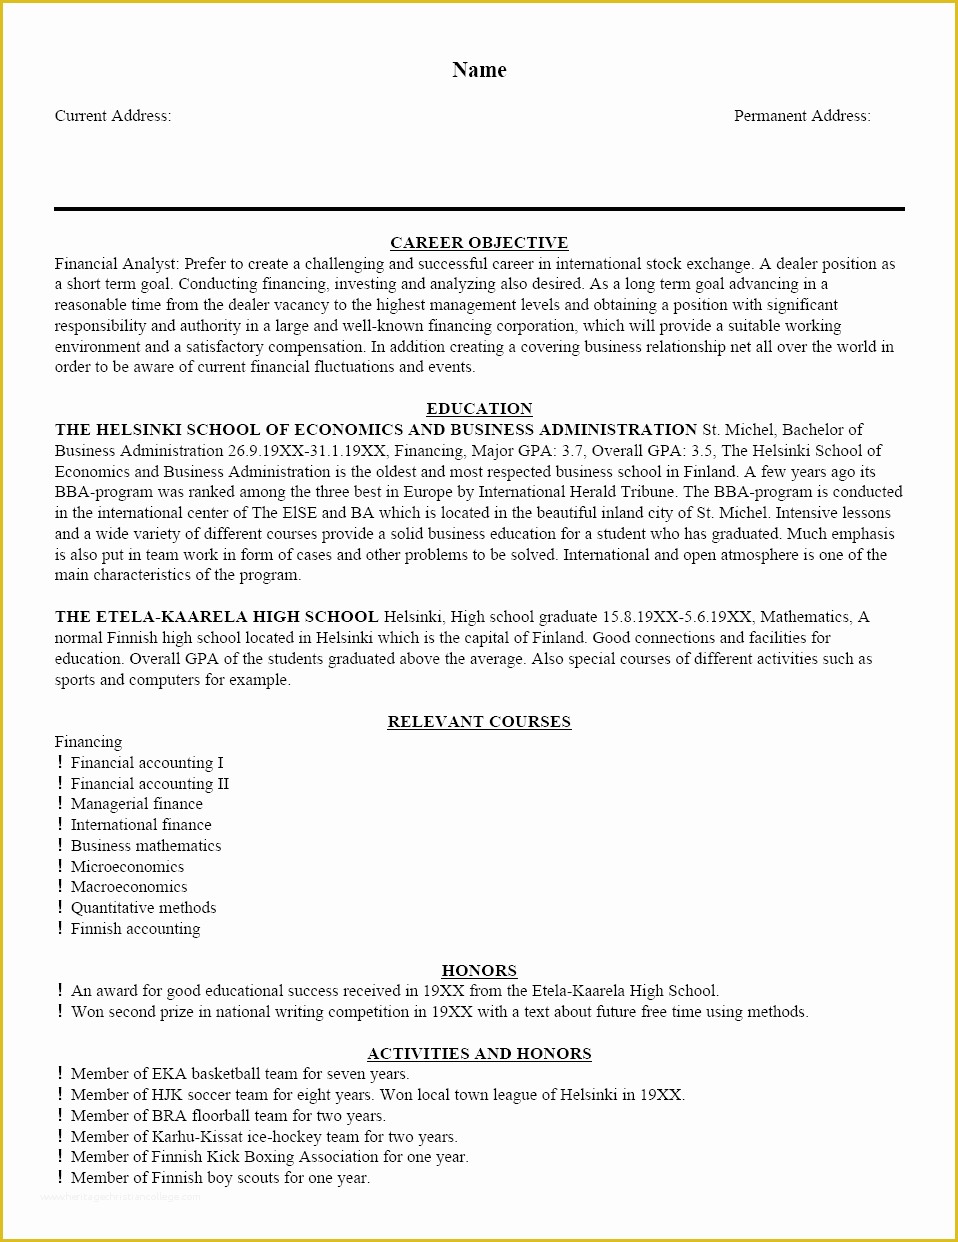 Free Job Resume Template Of Free Sample Resume Template Cover Letter and Resume